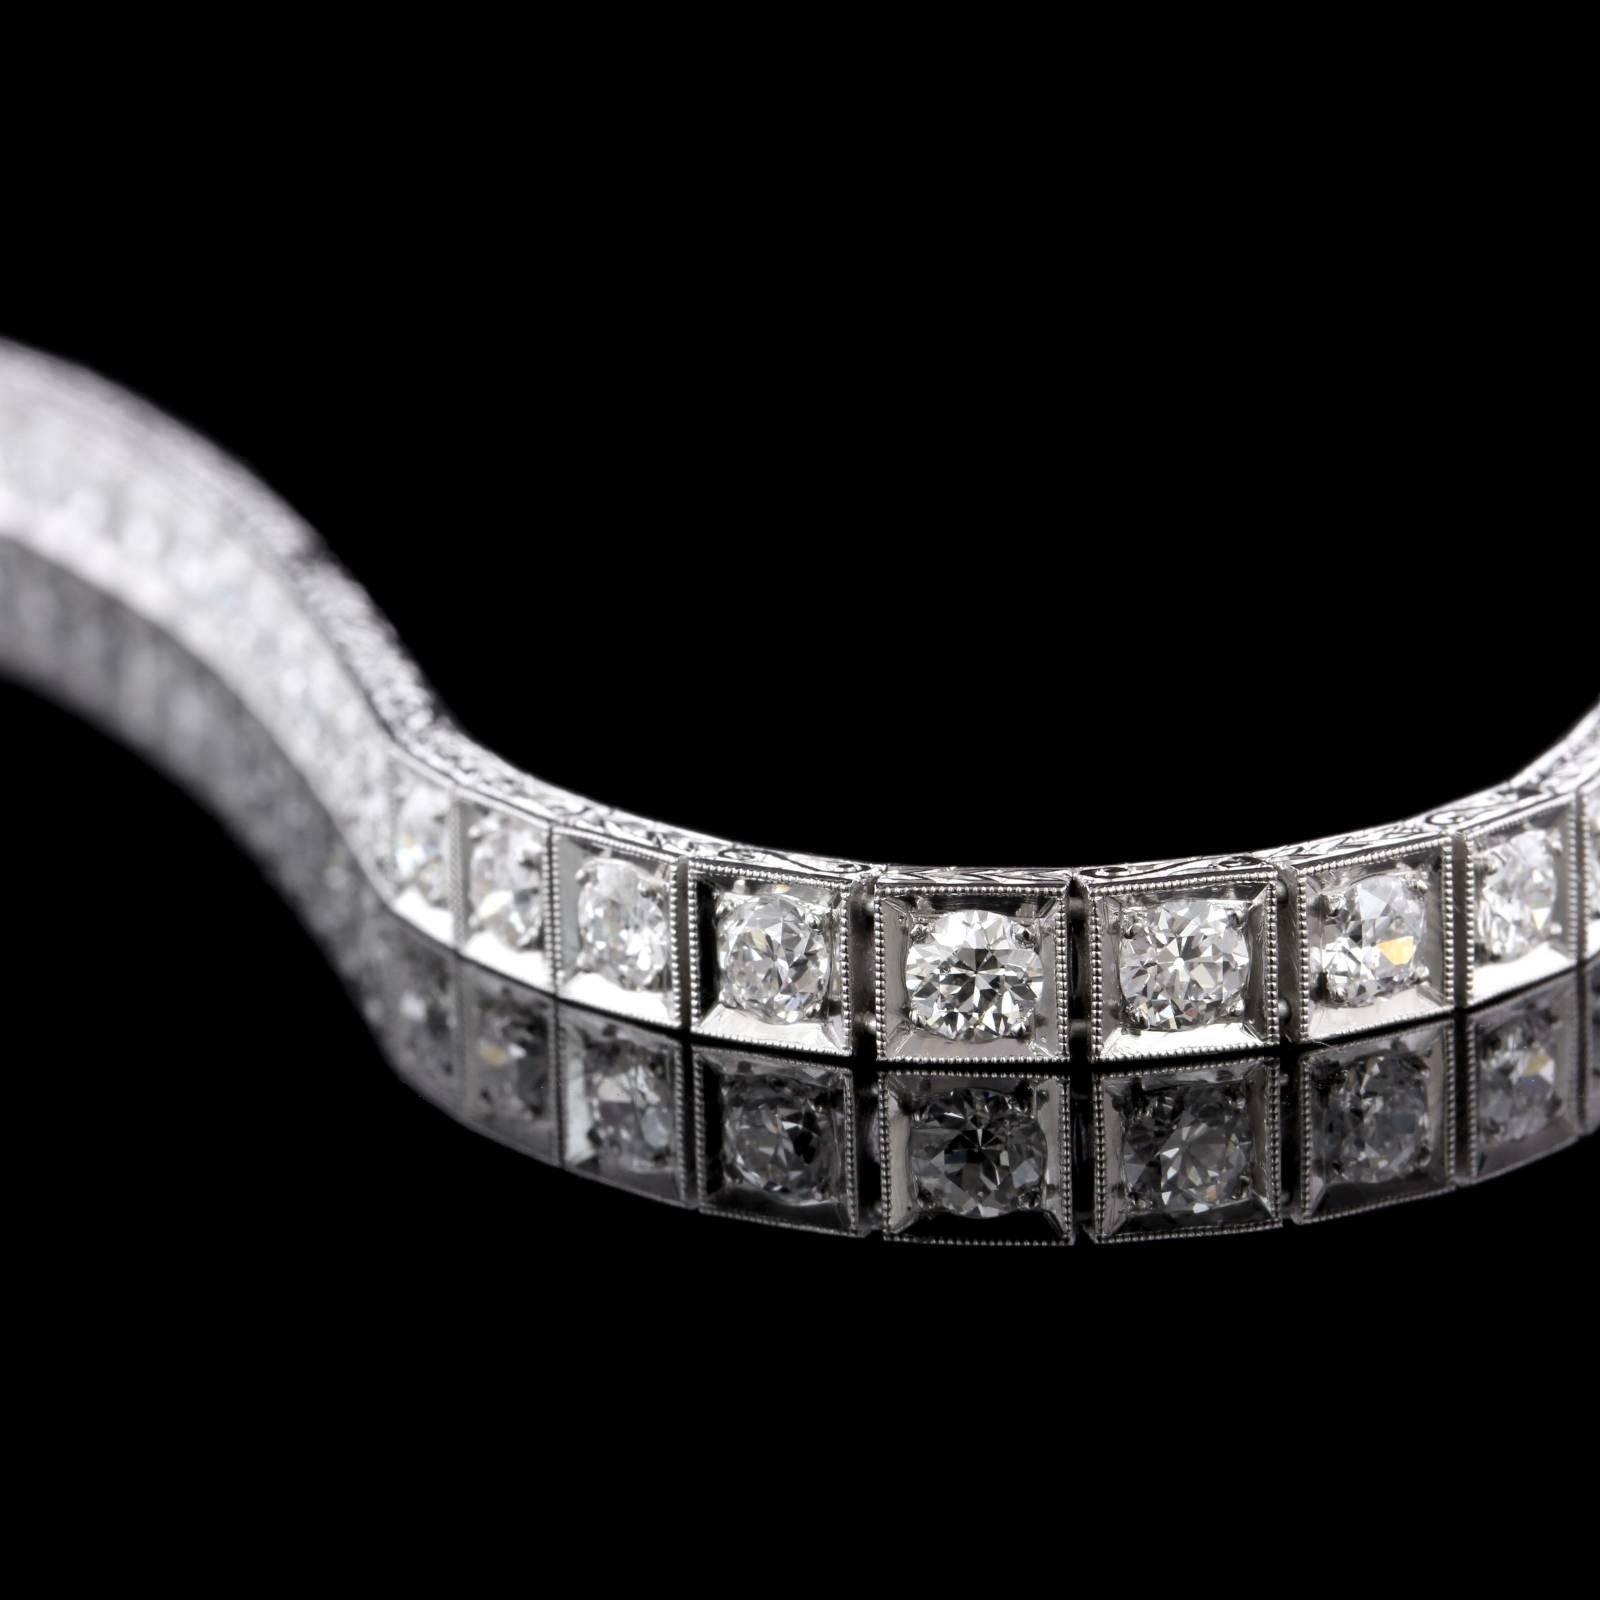 Art Deco Platinum Diamond Line Bracelet. The bracelet is bead set with 35 old European and old mine cut diamonds, approx. total wt. 4.00cts., HI color, VS2-SI1 clarity, millgrained and engraved accents, length 7 1/8